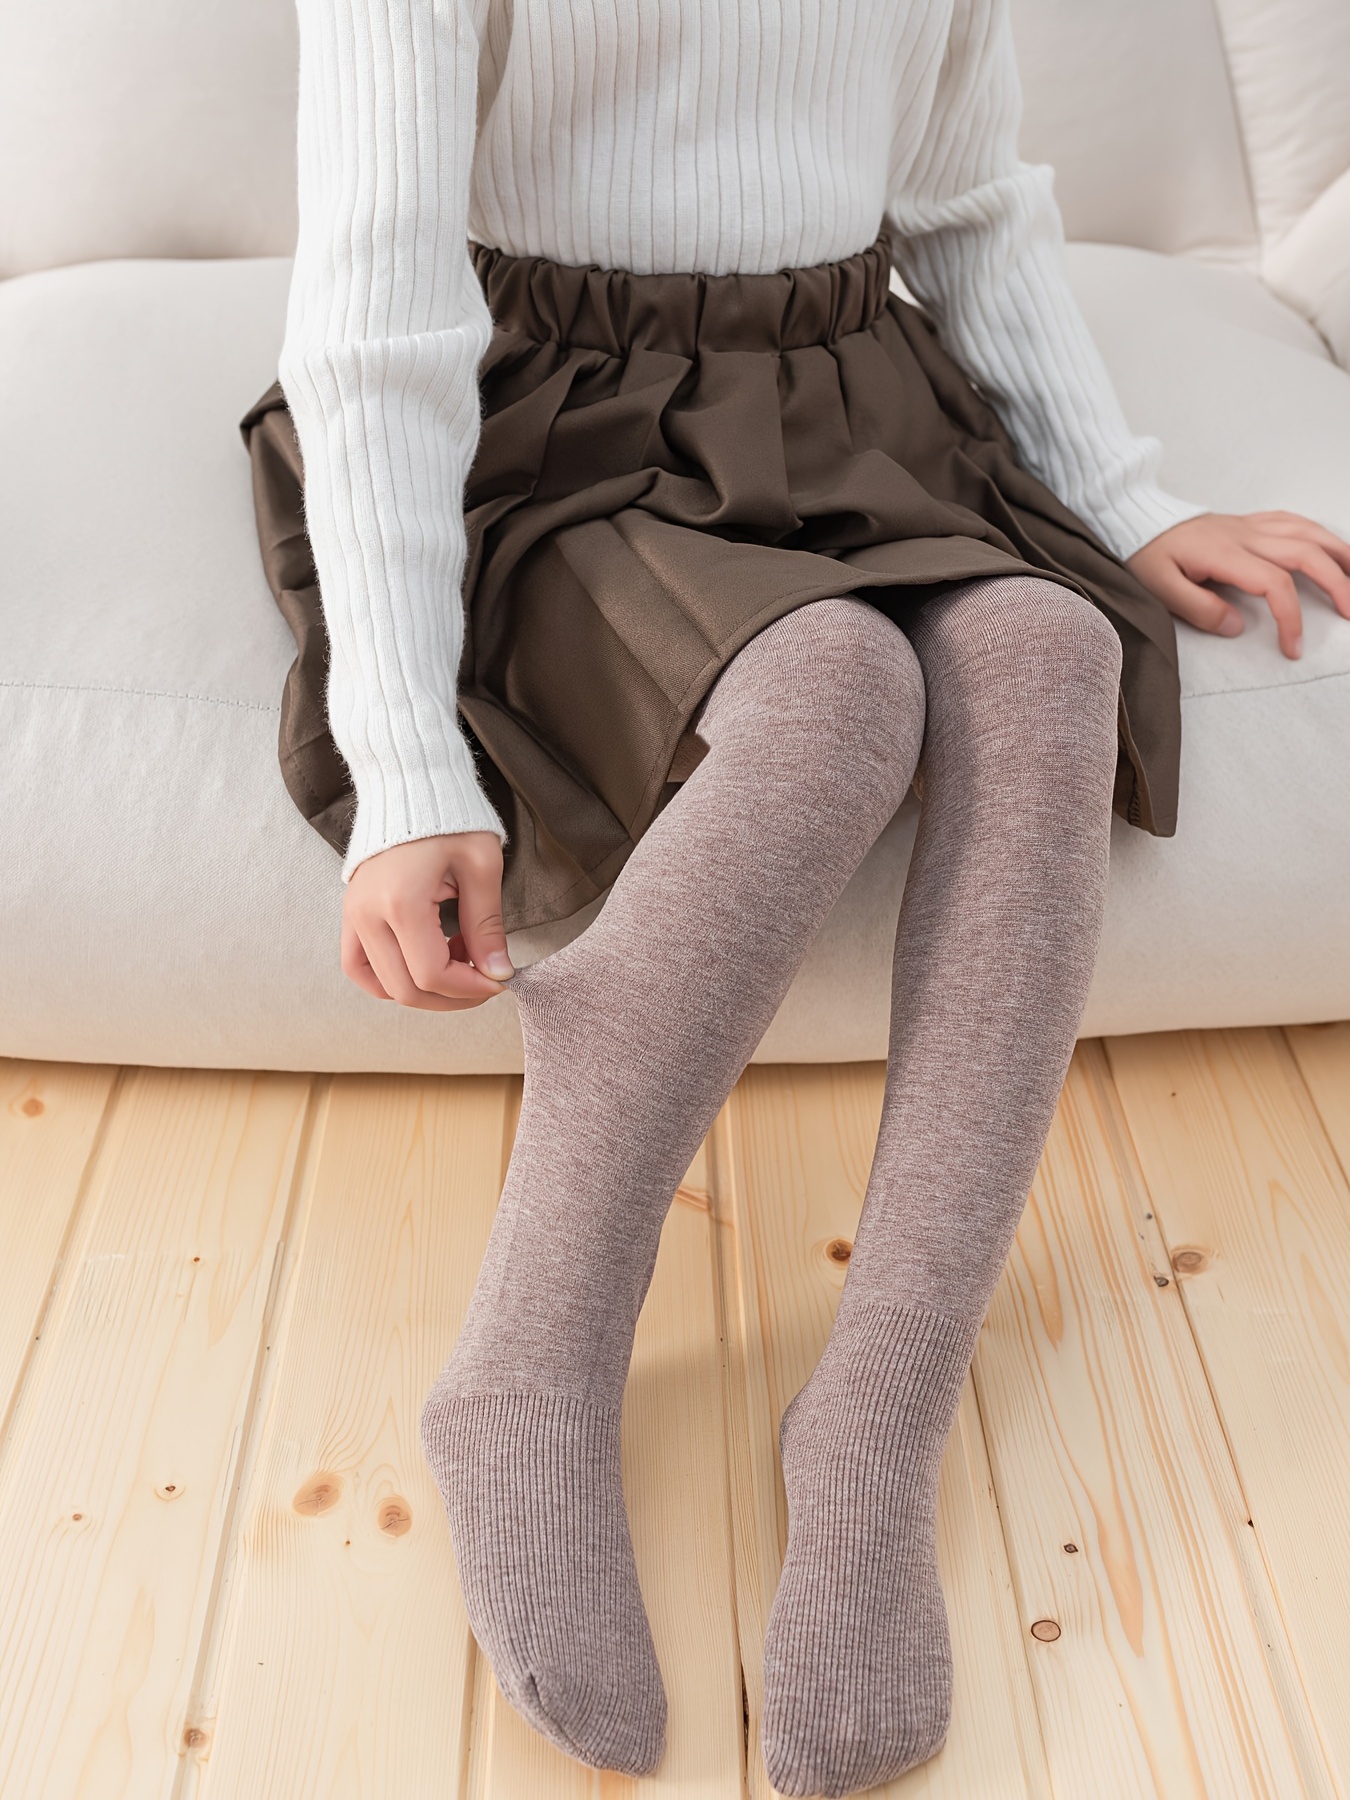  Hue Sweater Tights - Women's Socks & Hosiery / Women's  Clothing: Clothing, Shoes & Jewelry